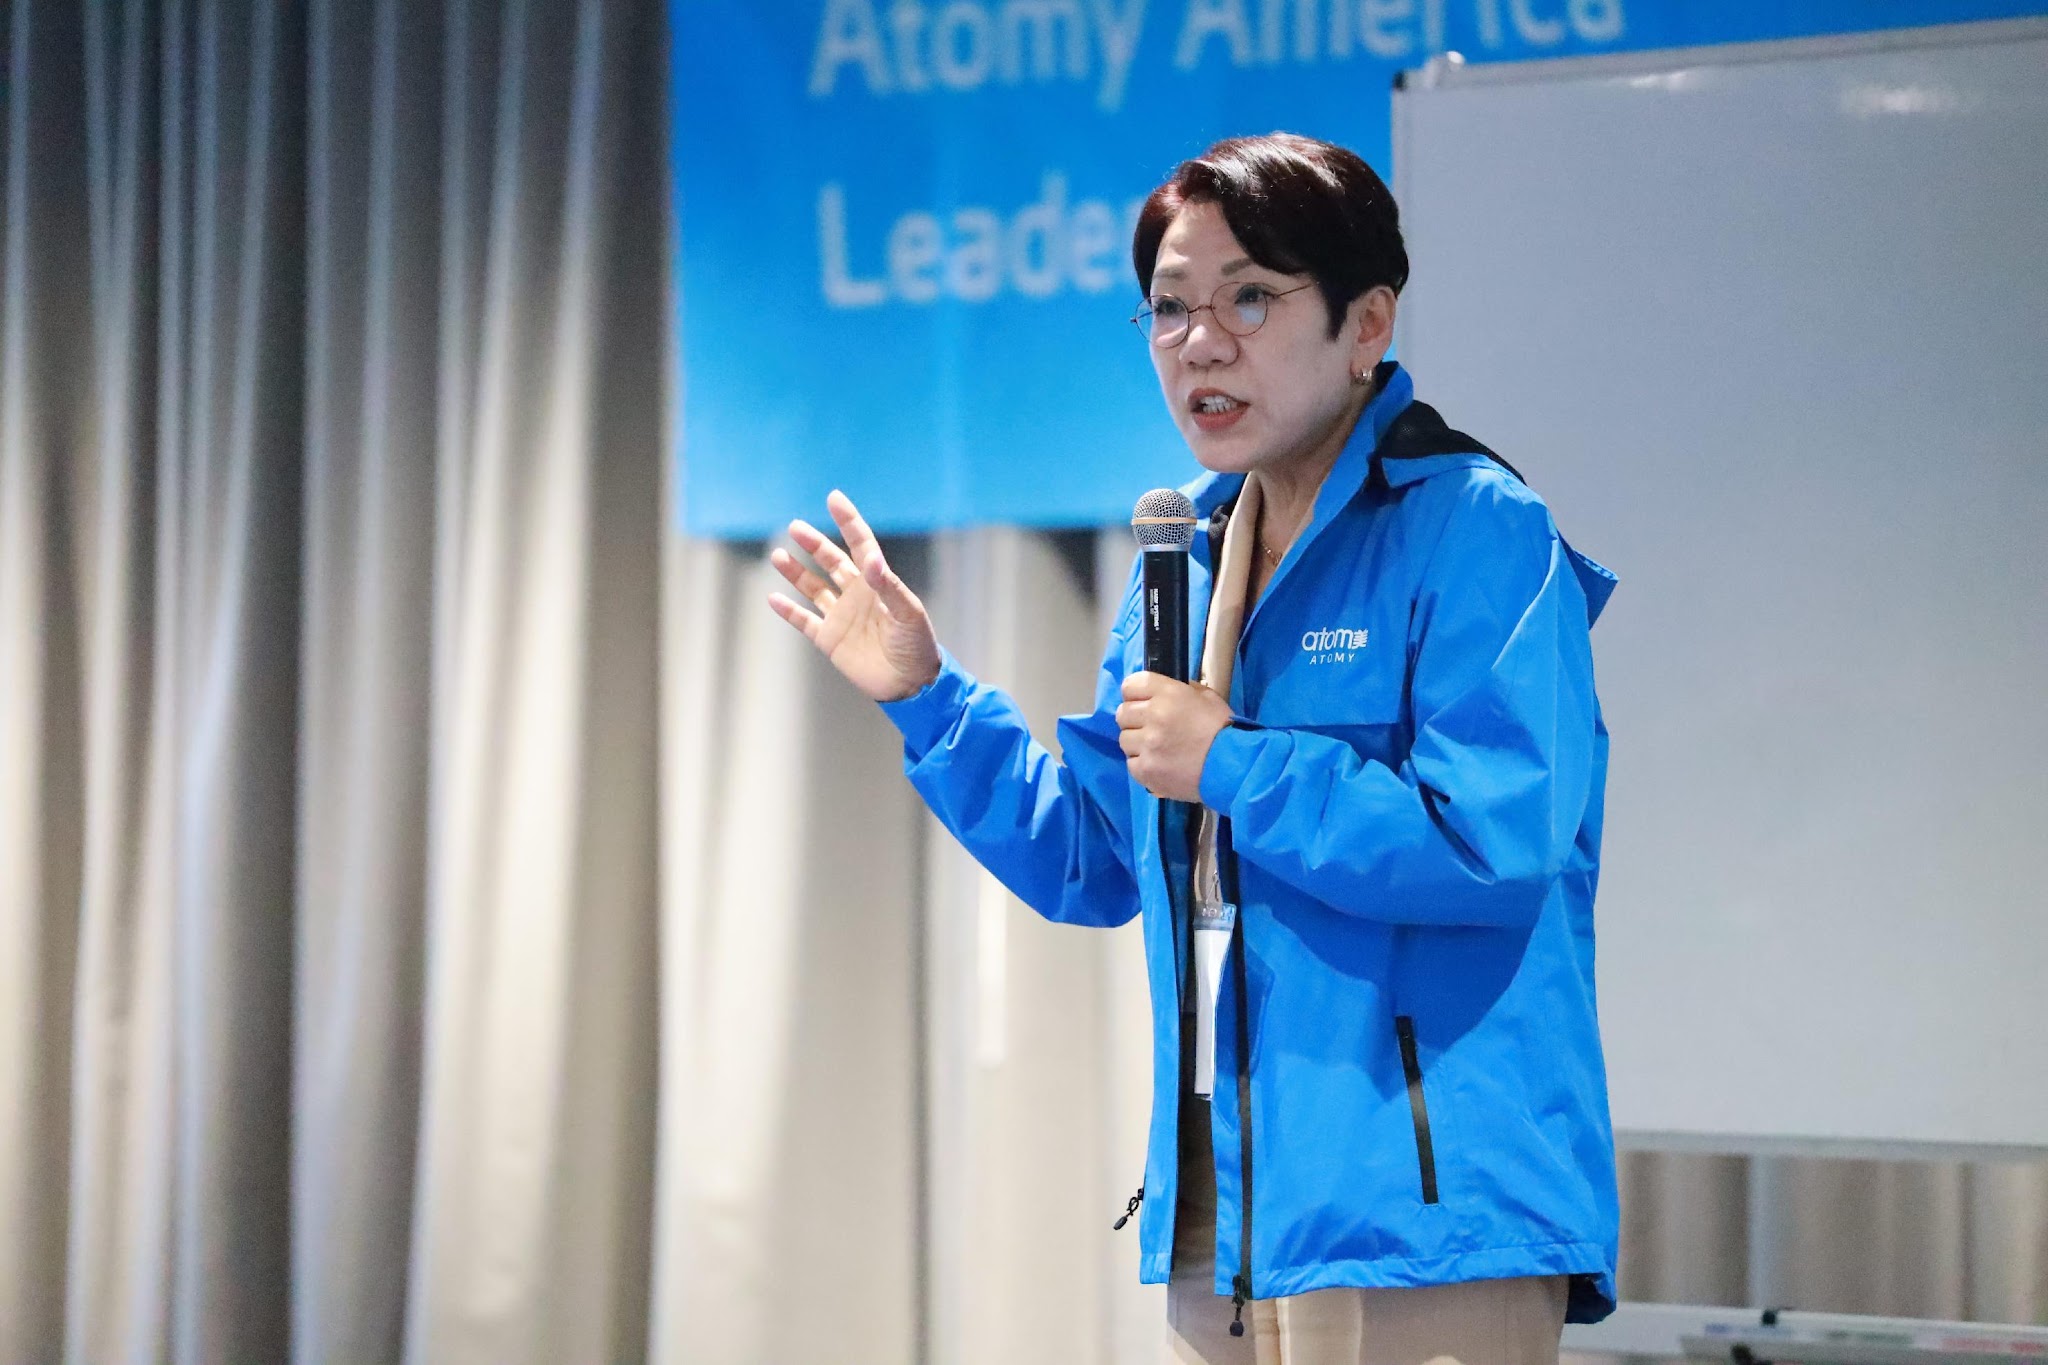 A person in a blue jacket holding a microphone

Description automatically generated